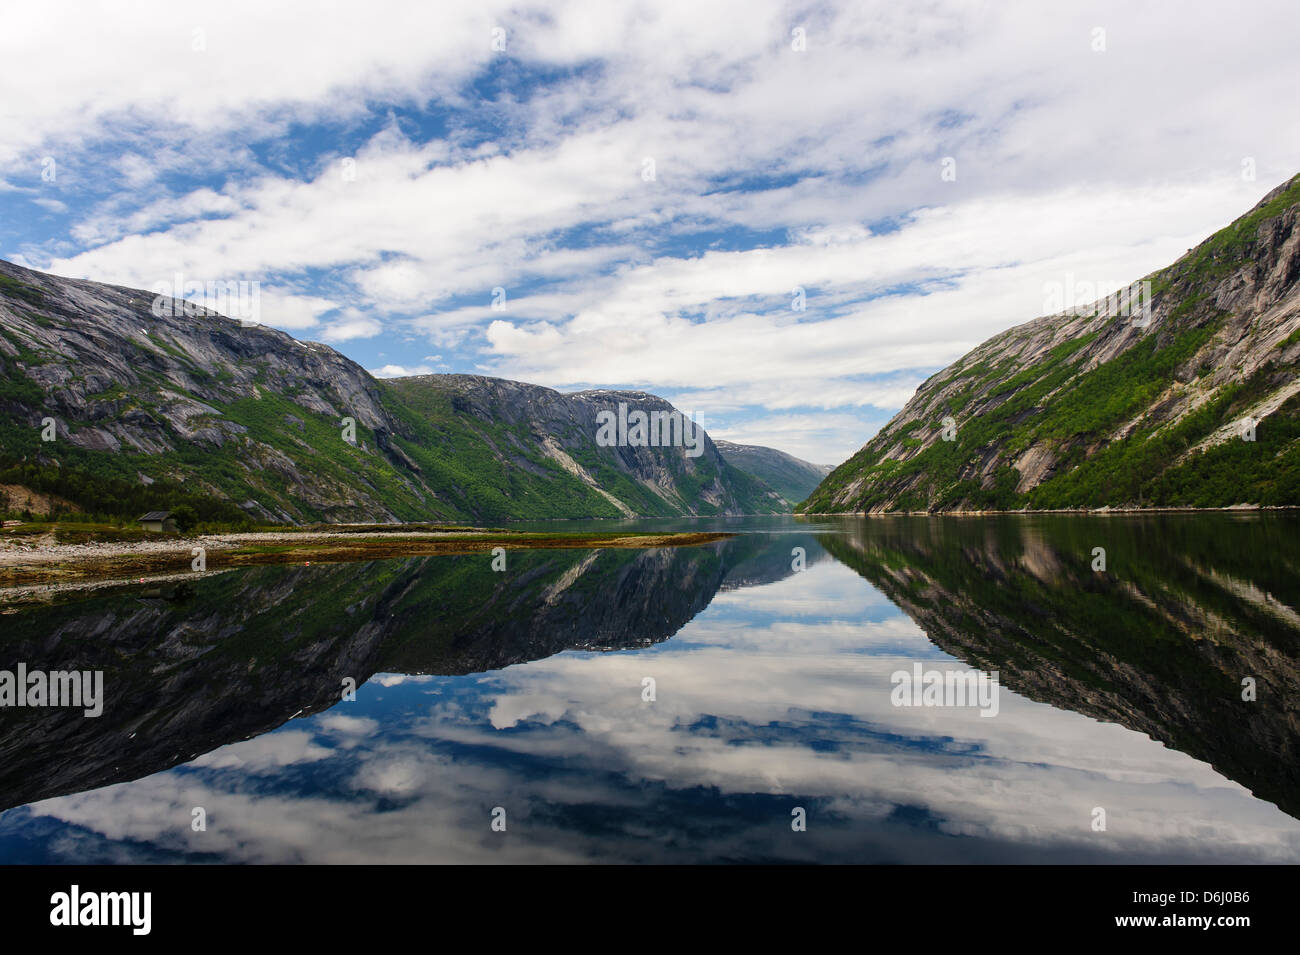 Norway. Scenic view of the fjord from Hellmobotn. Stock Photo